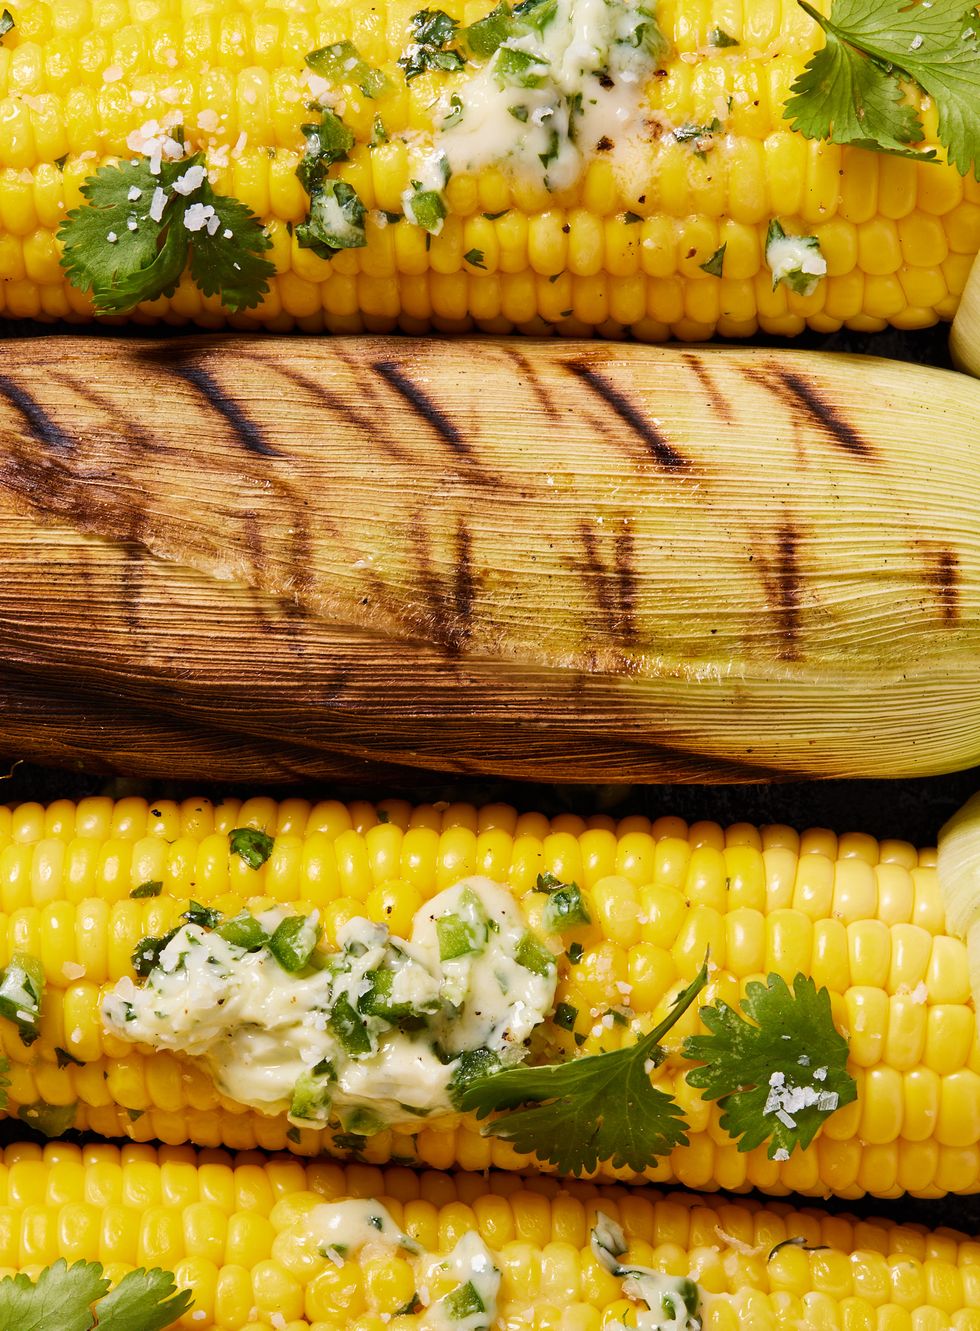 smoked corn on the cob topped with herb butter and cilantro